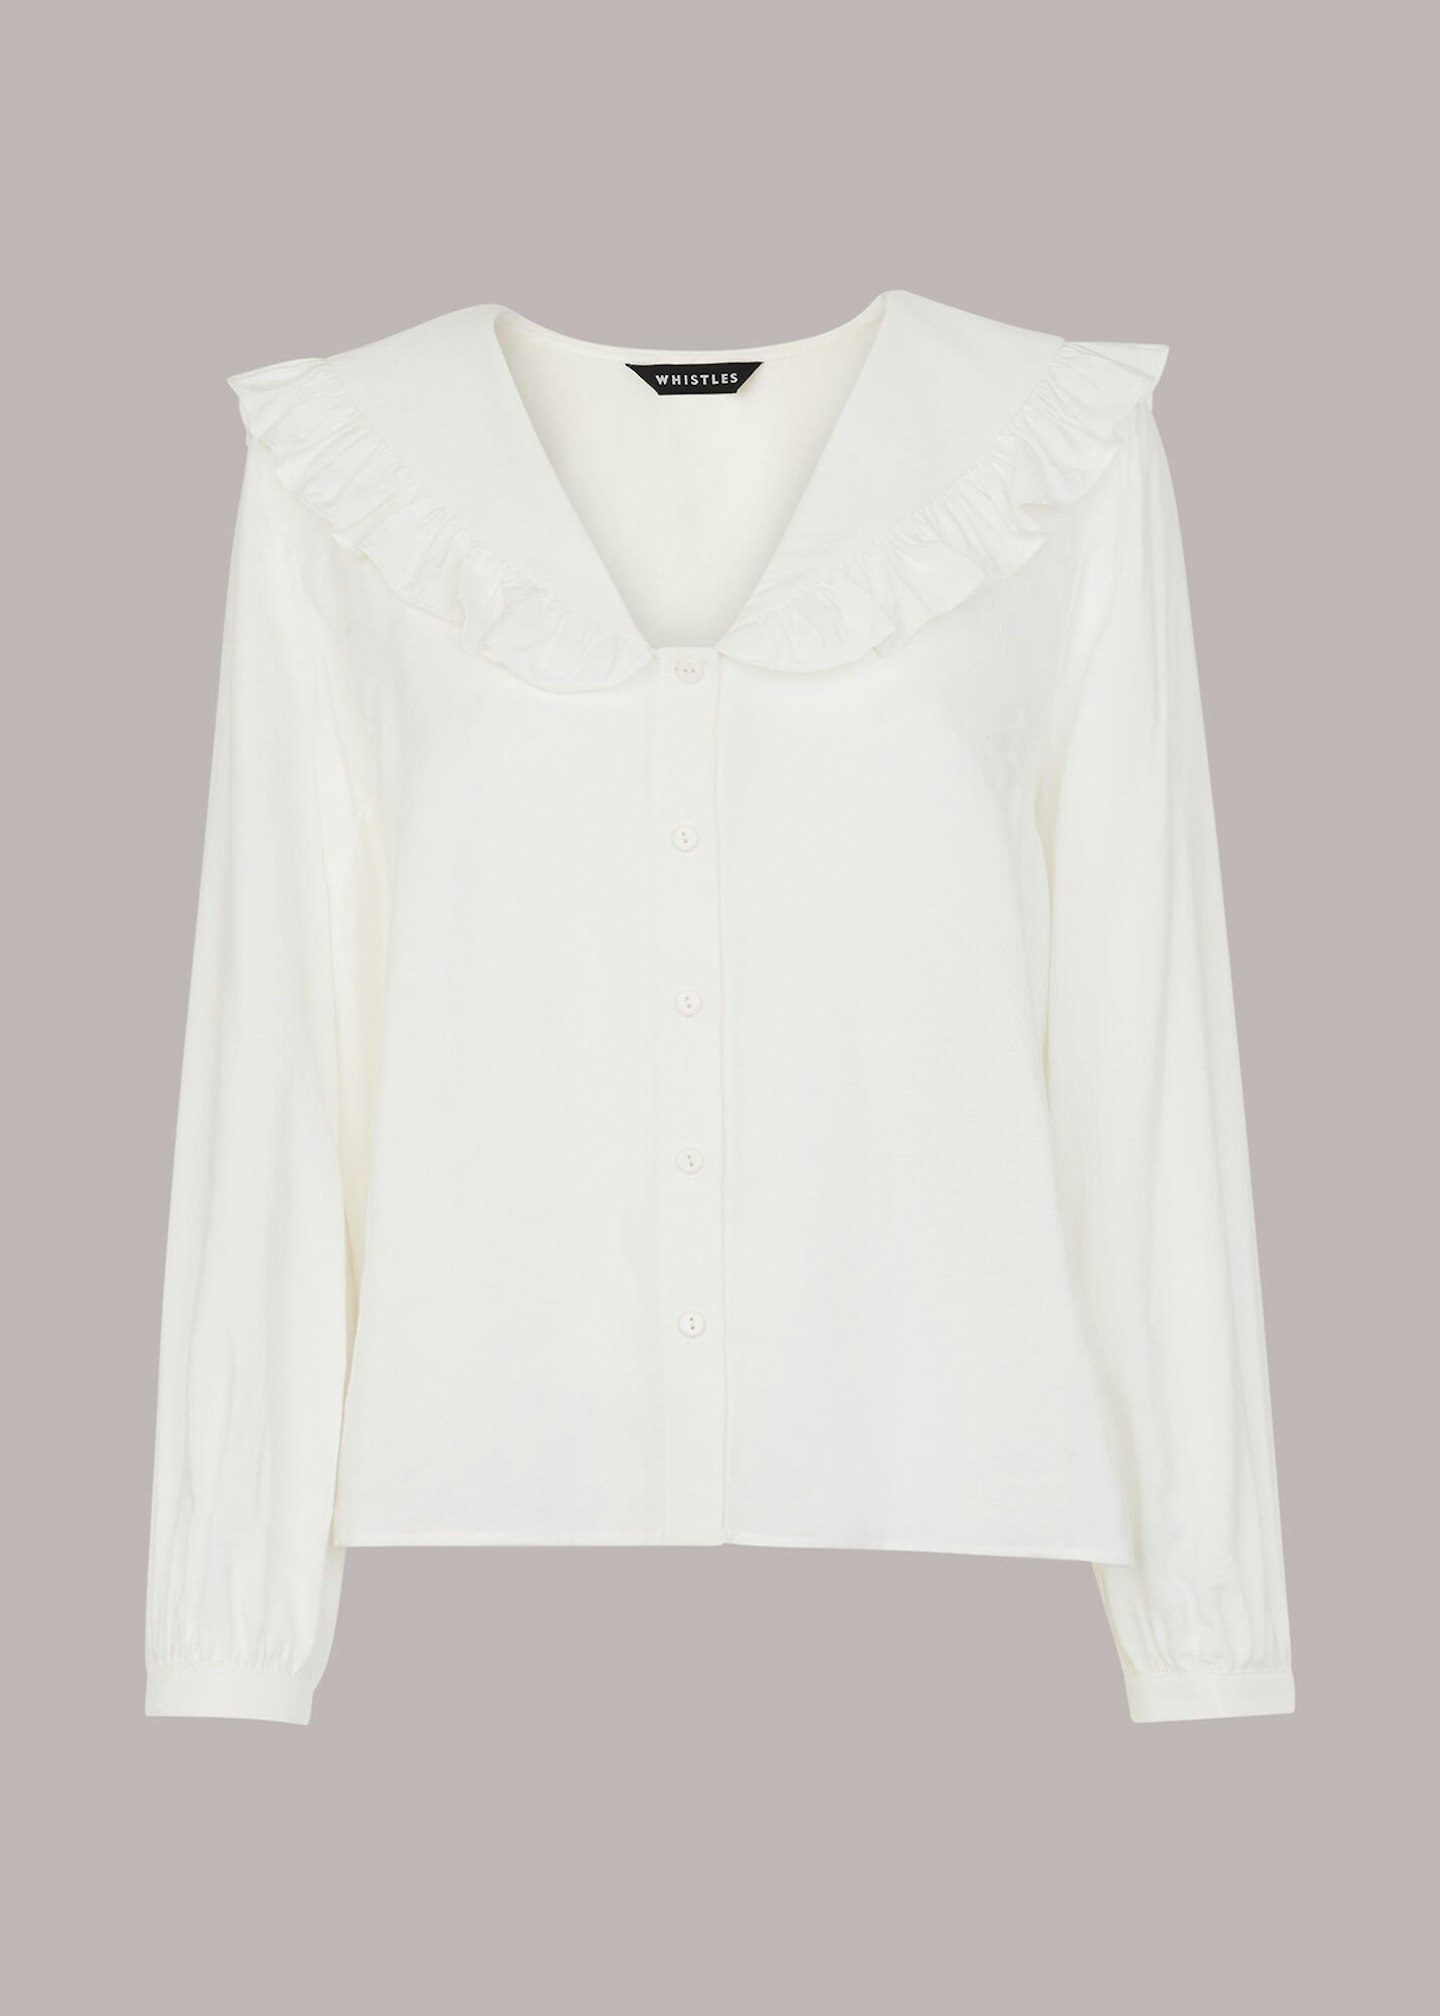 Whistles, Lenny Frill Collar Detail Top